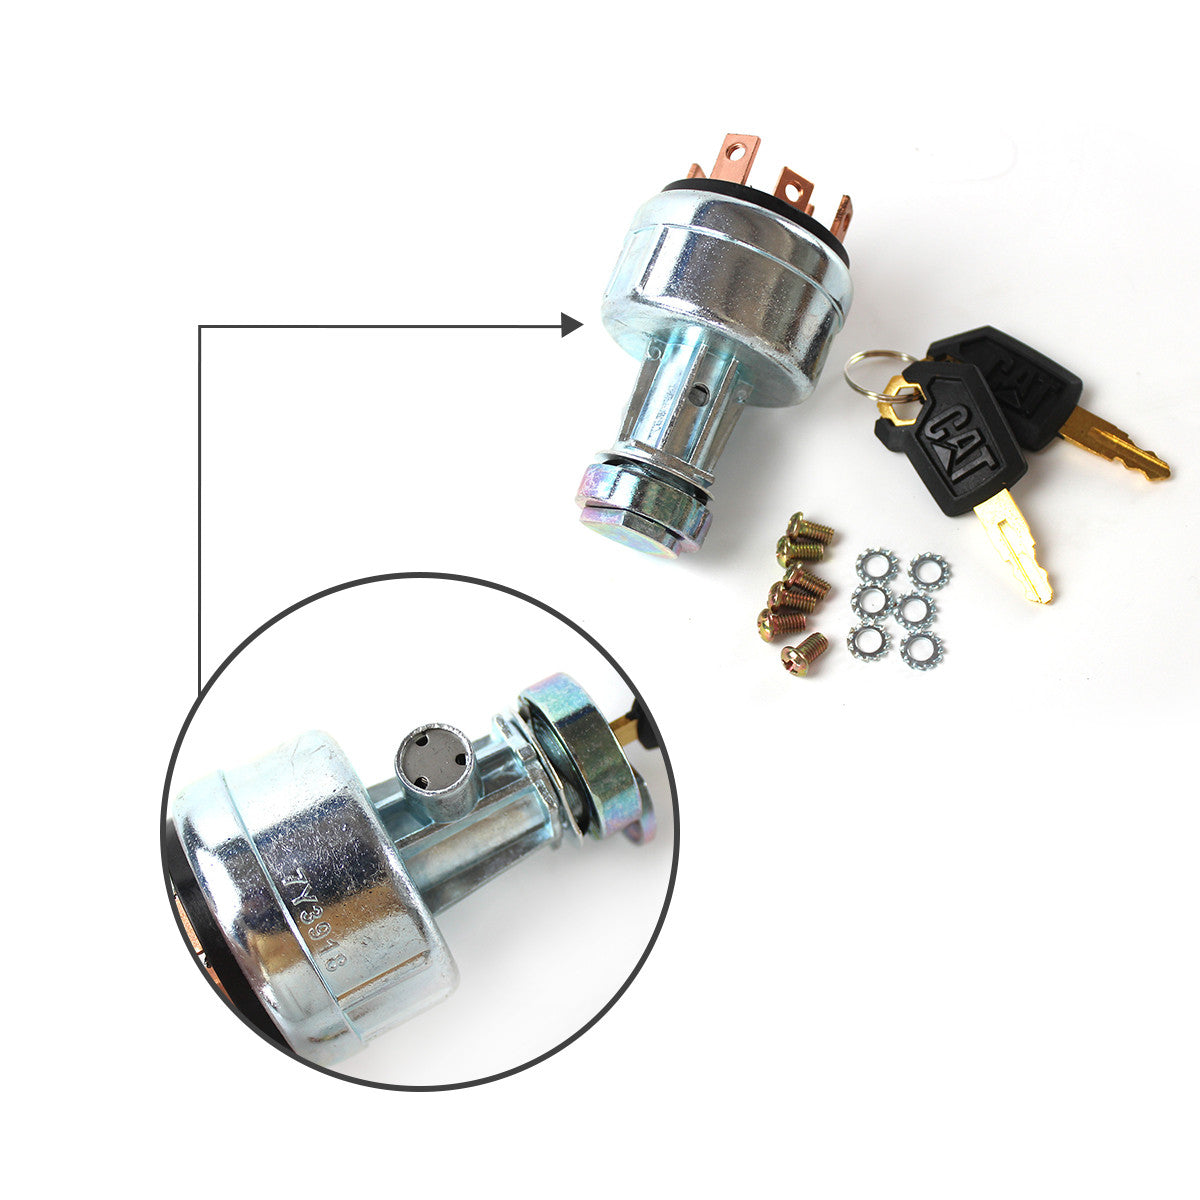 7Y-3918 Ignition Switch with 6 Pins for Cat E320B E330B E220B Excavator - Sinocmp